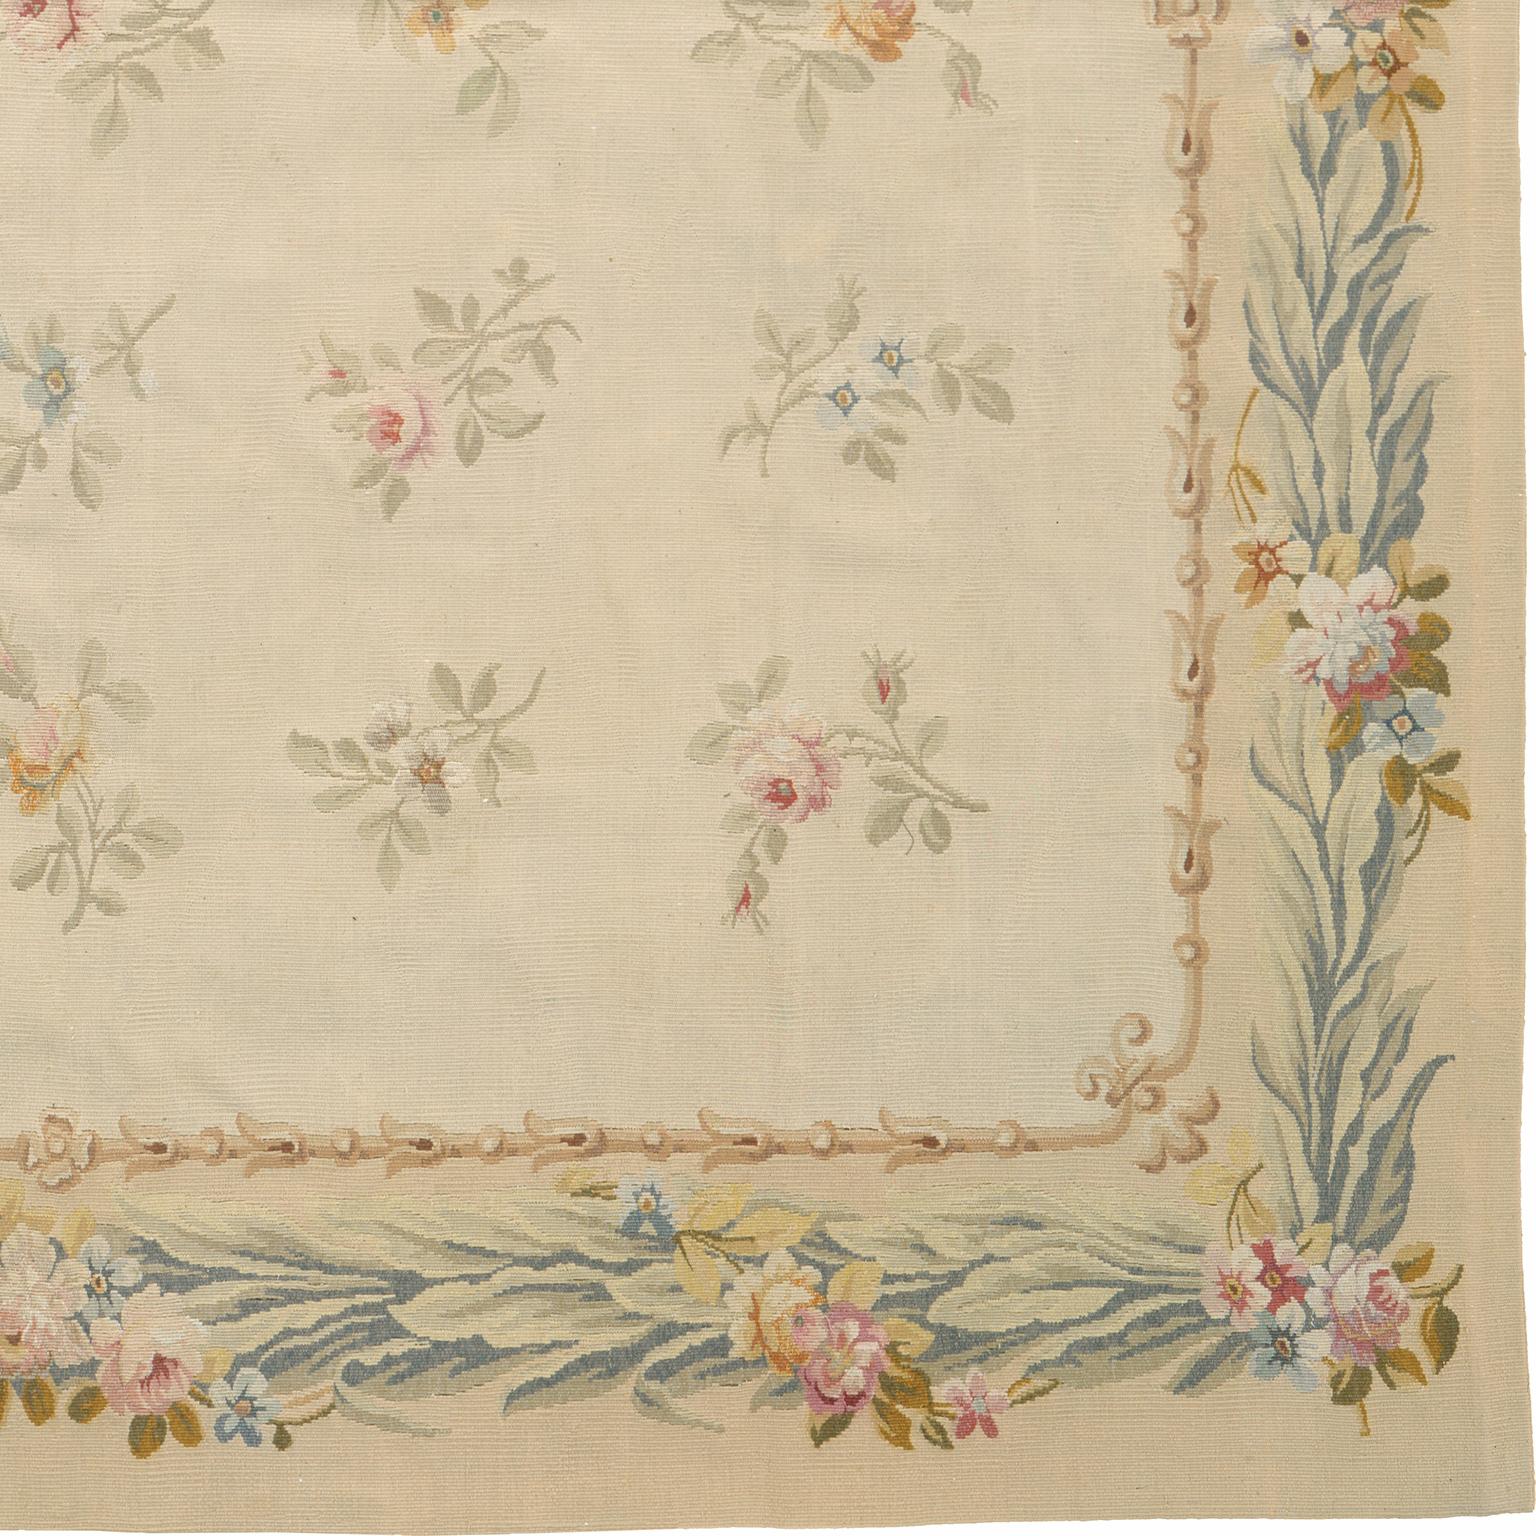 Antique French Aubusson rug
France, circa 1920
Handwoven.